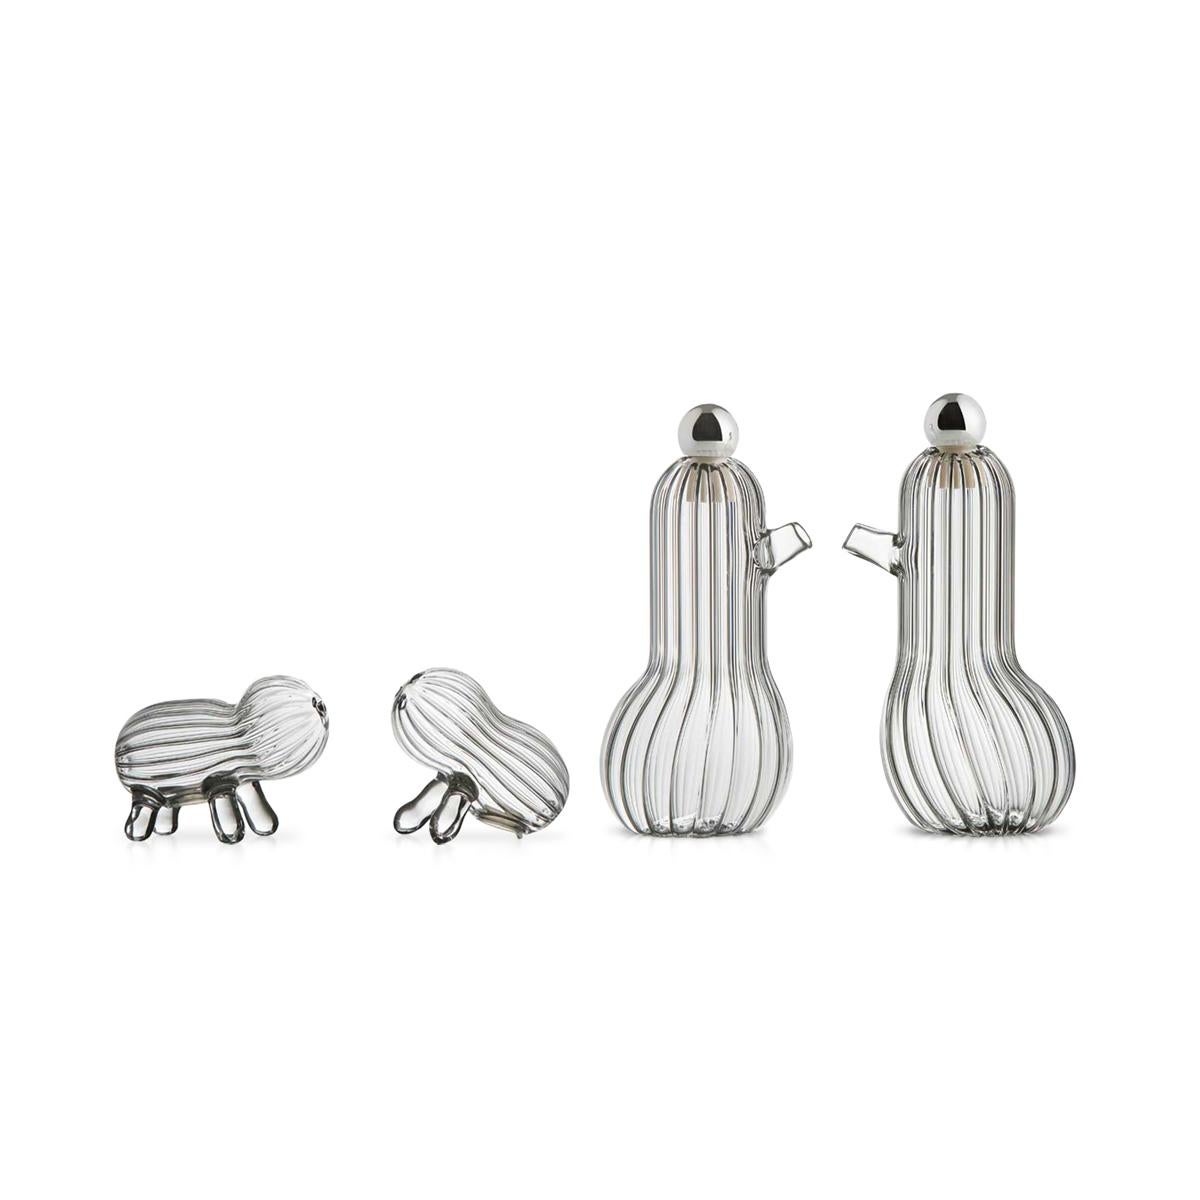 Italian Tipì, Tidò, Lilì and Lulù Set for Dressing in Mouth Blown Glass by Mattero Cibic For Sale